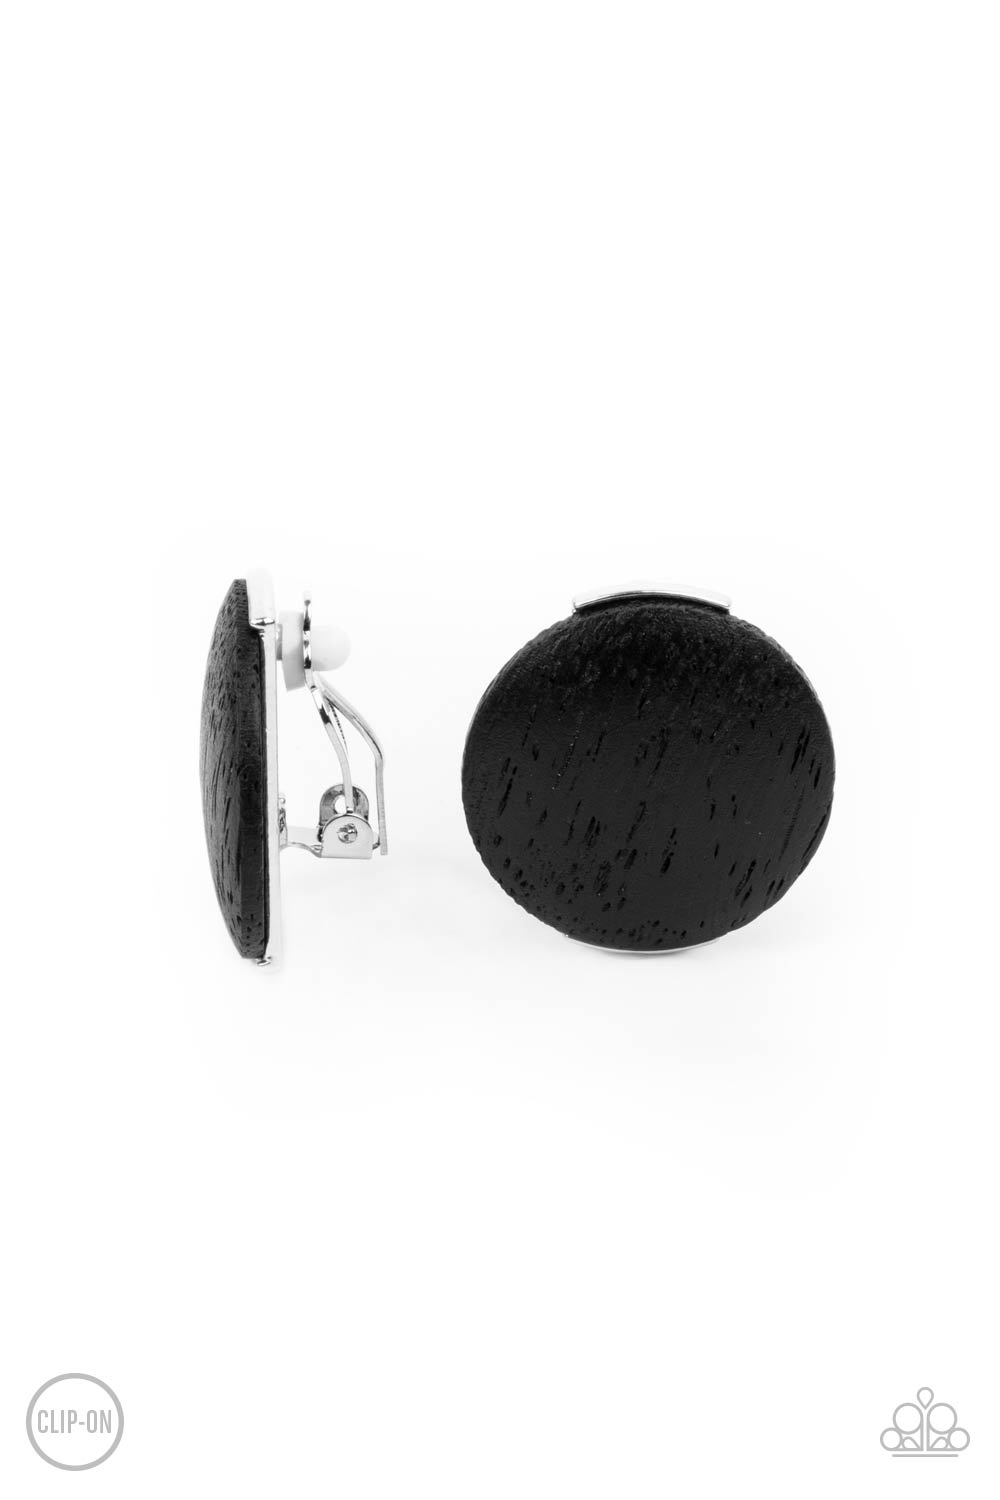 WOODWORK It Black Clip-On Earring - Paparazzi Accessories  An oversized black wooden disc is fitting in place between a silver frame, creating an earthy effect. Earring attaches to a standard clip-on fitting.  All Paparazzi Accessories are lead free and nickel free!  Sold as one pair of clip-on earrings.